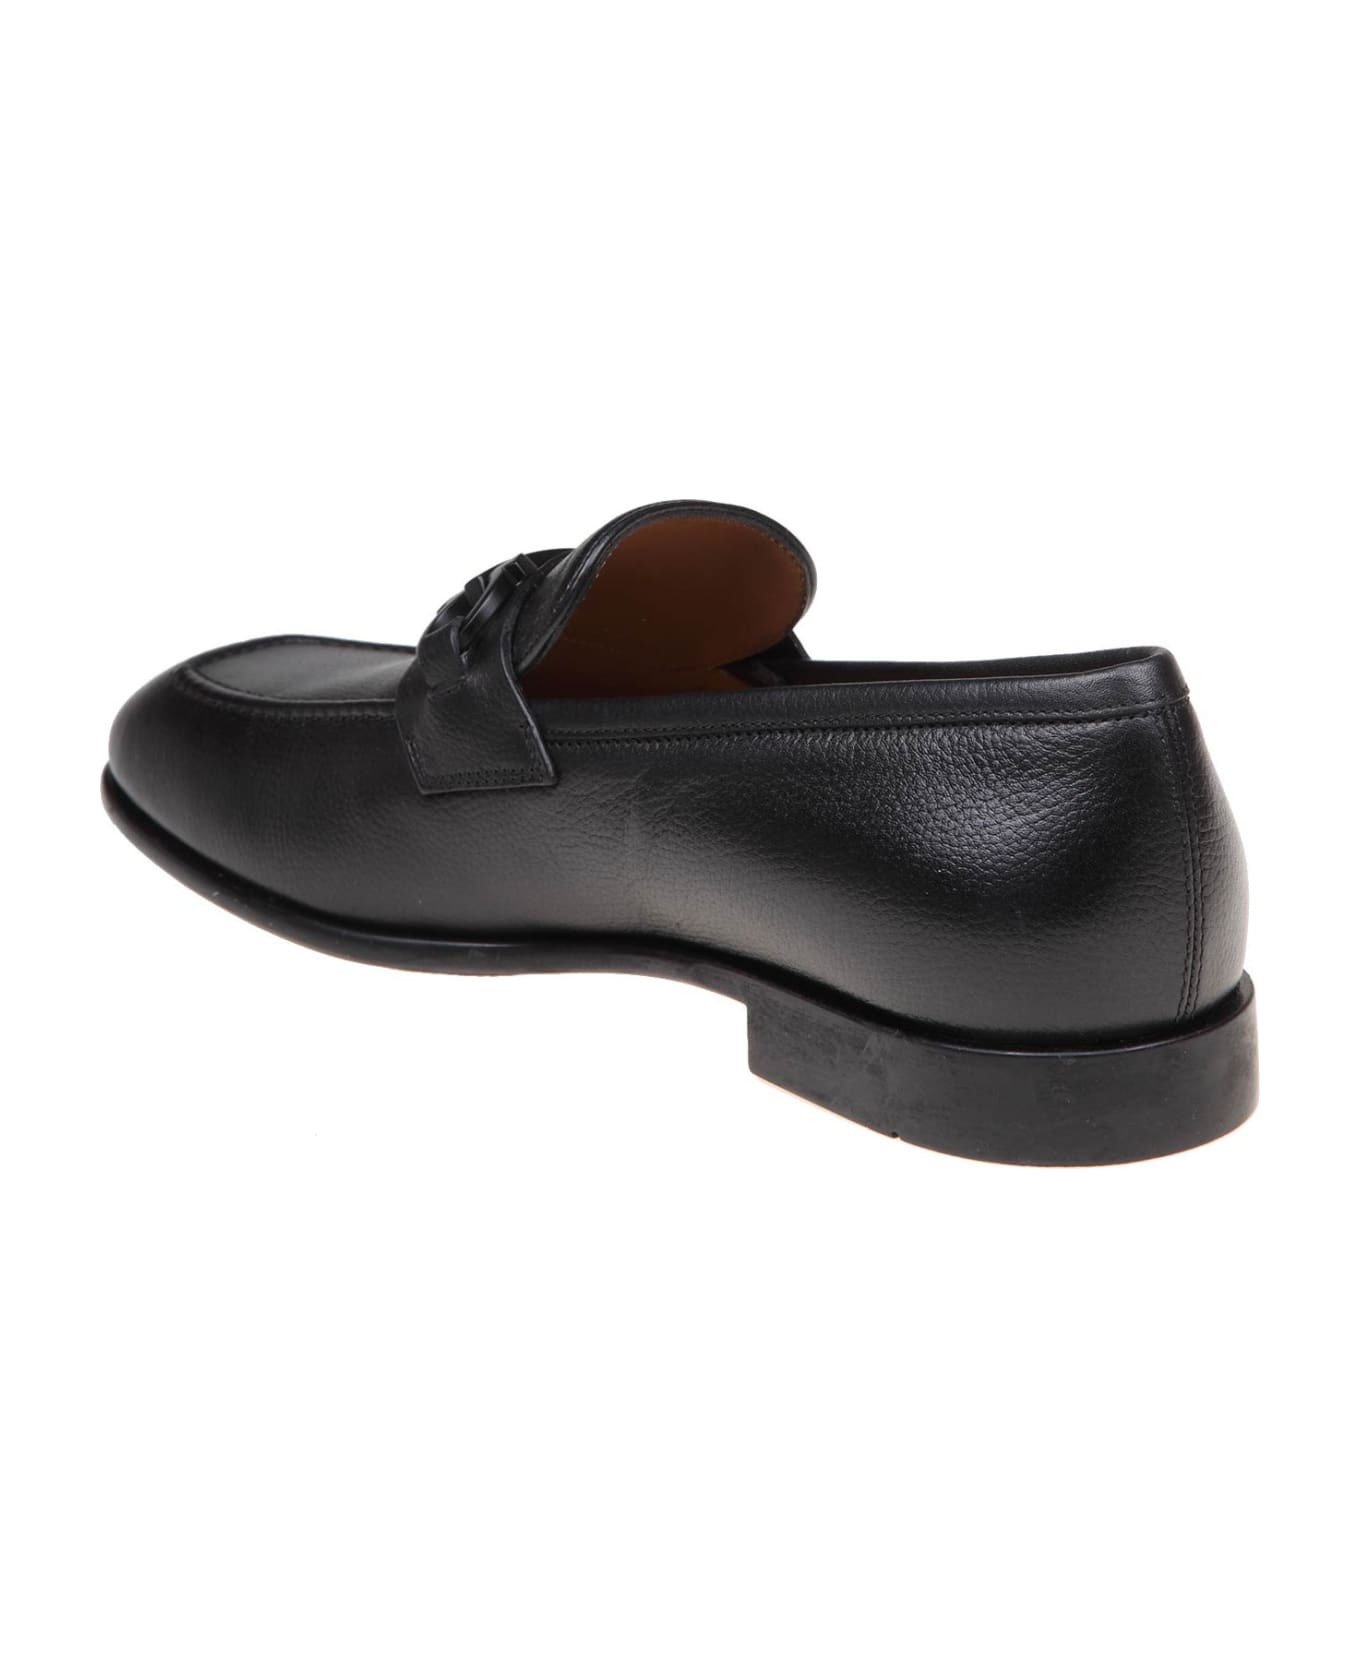 Ferragamo Leather Loafers With Gancini Buckle - Black ローファー＆デッキシューズ